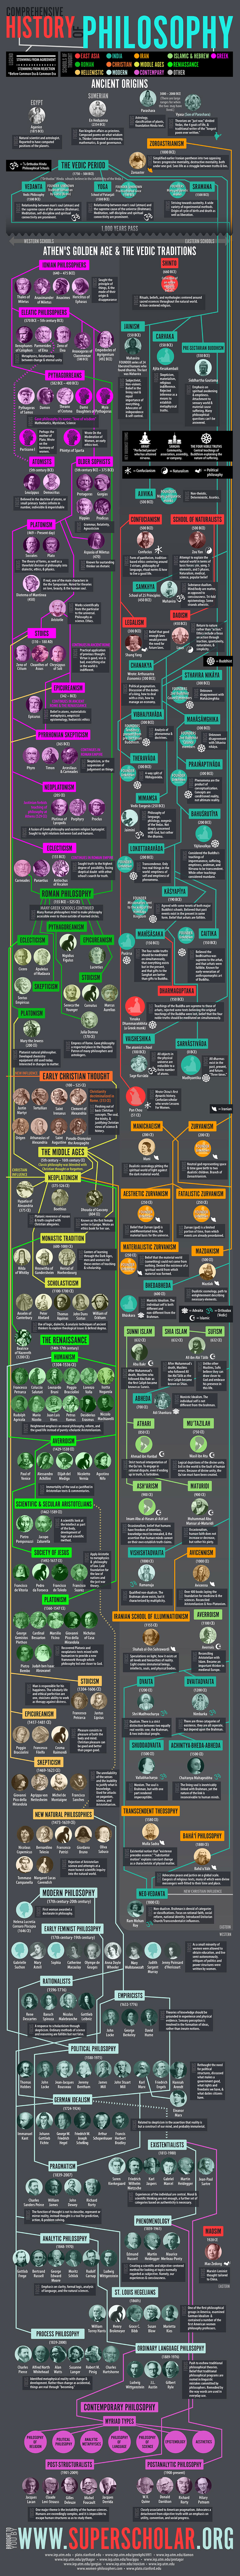 History of Philosophy Infographic